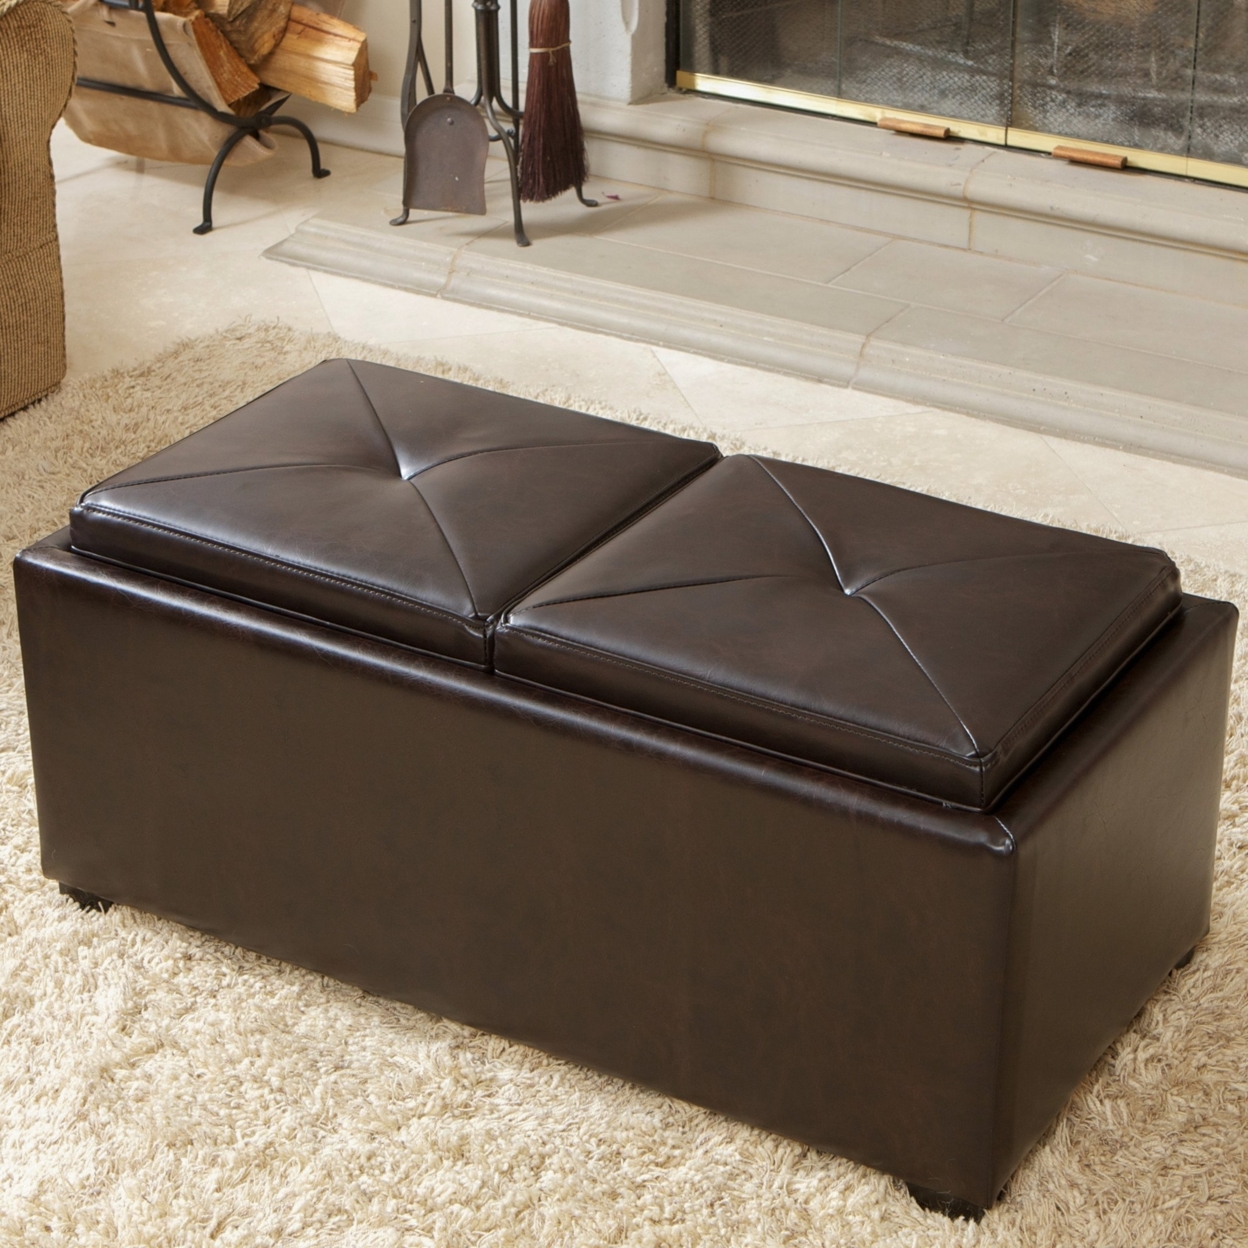 Kenwell Contemporary Bonded Leather Tray Top Storage Ottoman